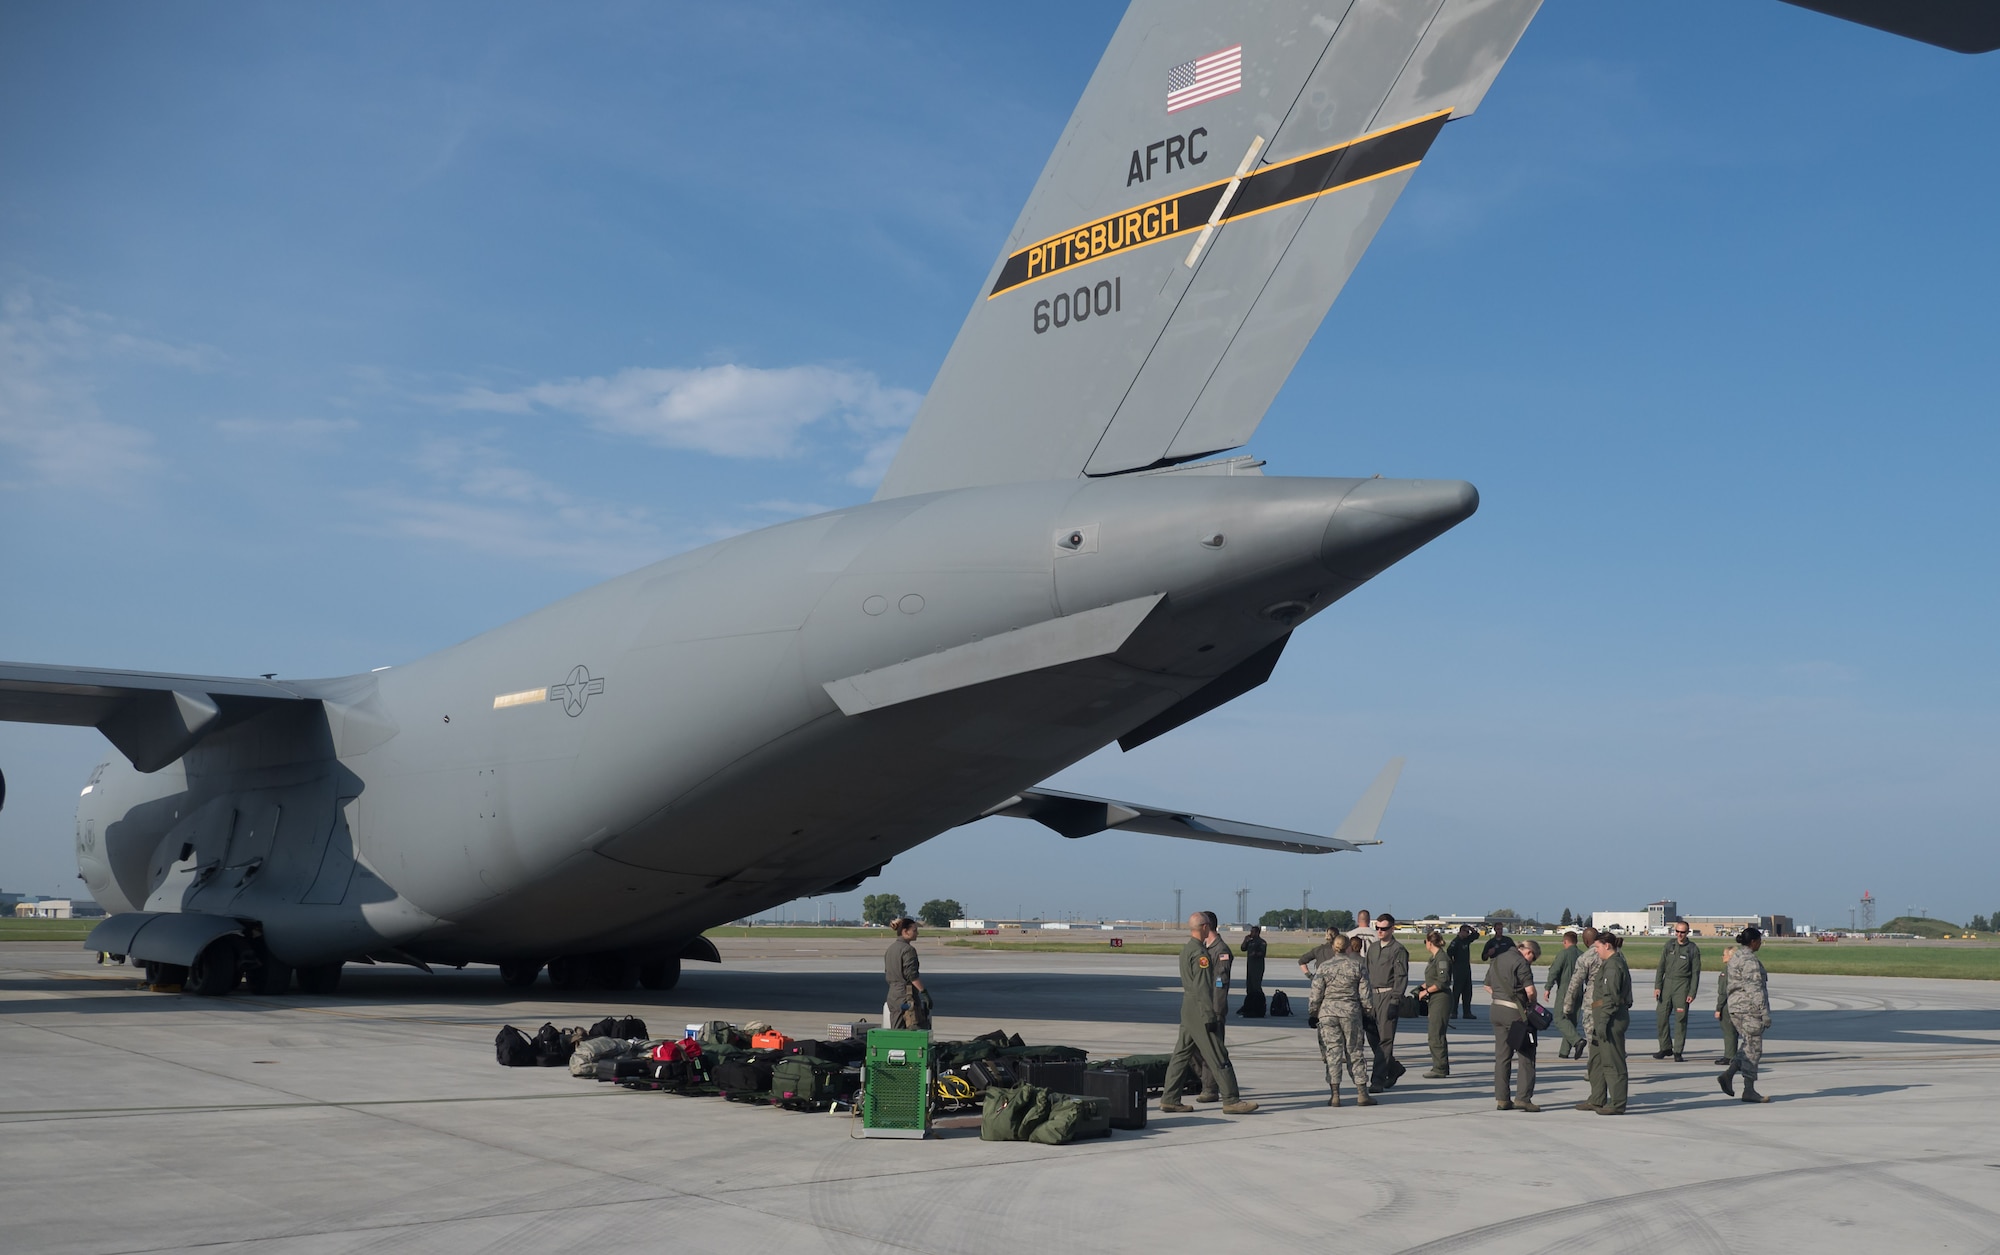 Airmen prepare to load AES patients aboard a C-17 at Minneapolis St. Paul Air Reserve Station for transport to Ft. McCoy, Wis. as part of Exercise Patriot Warrior (Air Force Photo/Paul Zadach)